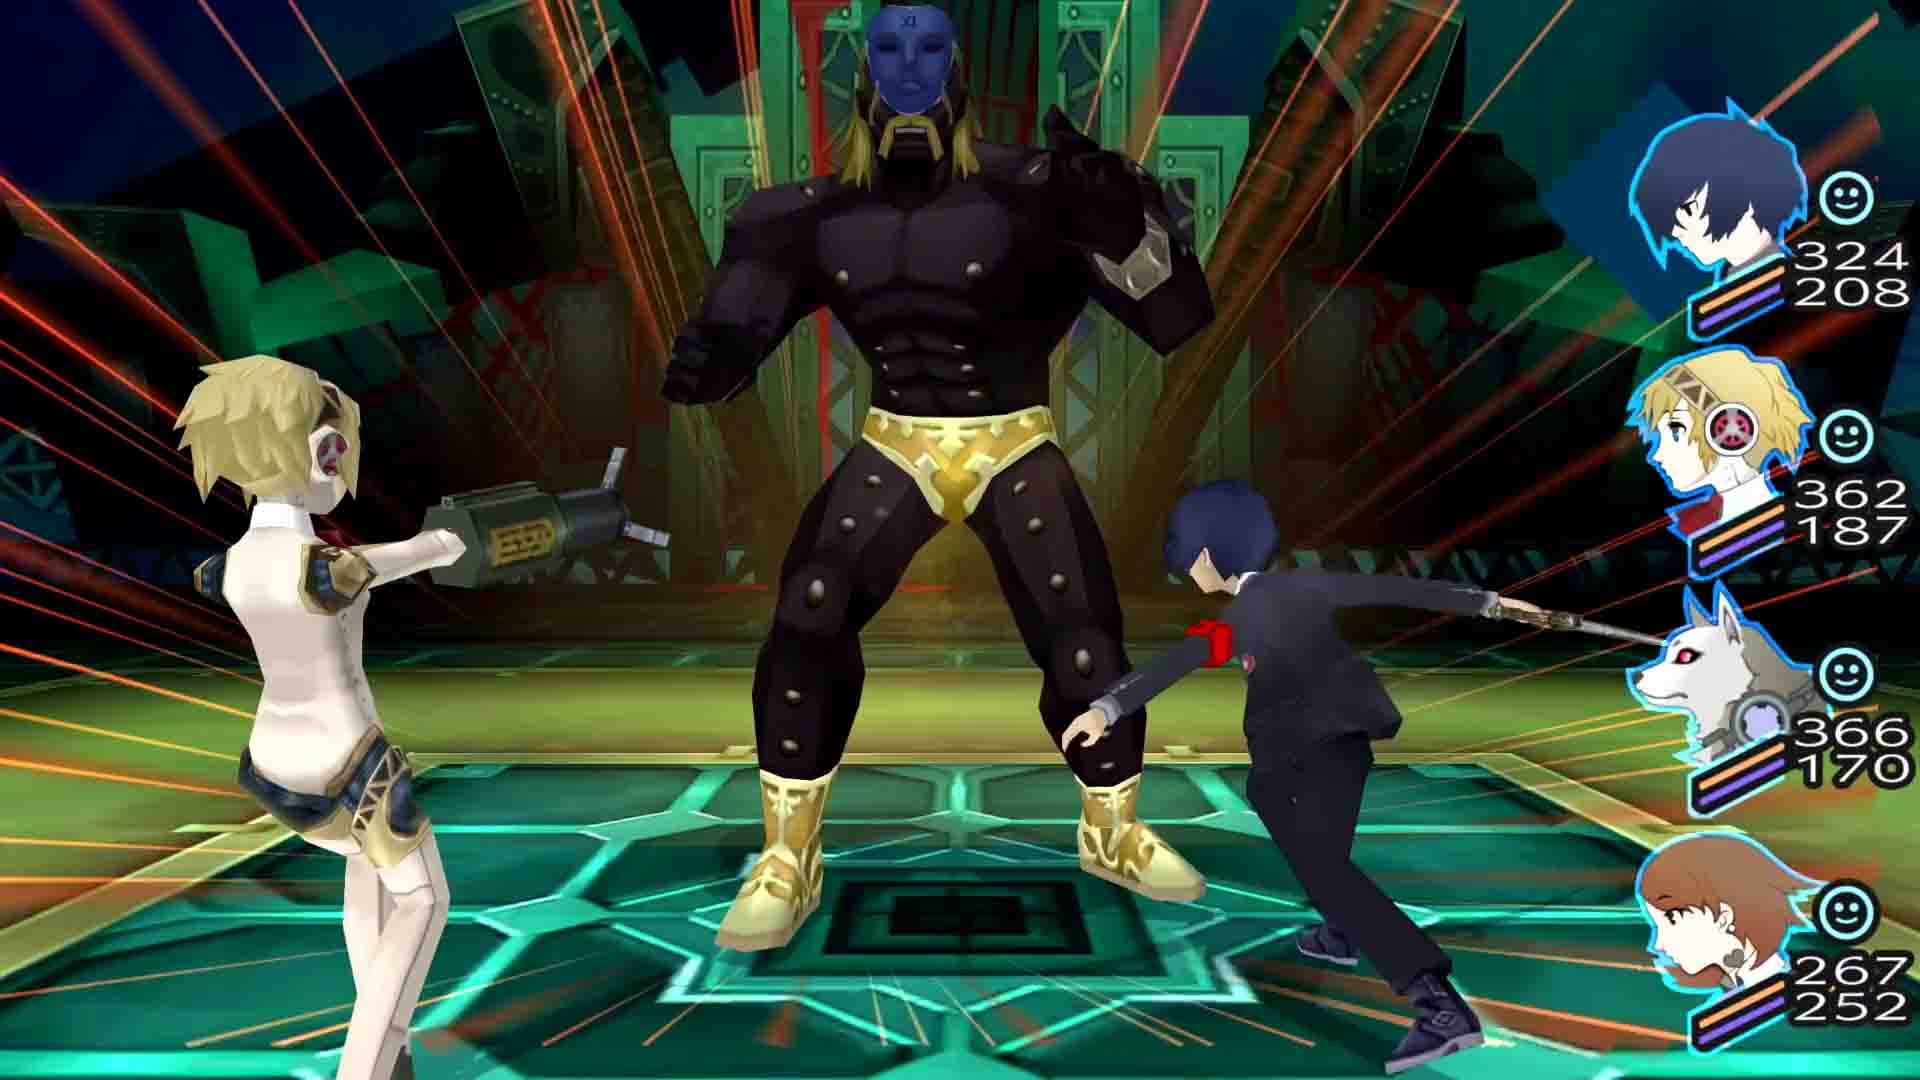 A screenshot from Persona 3